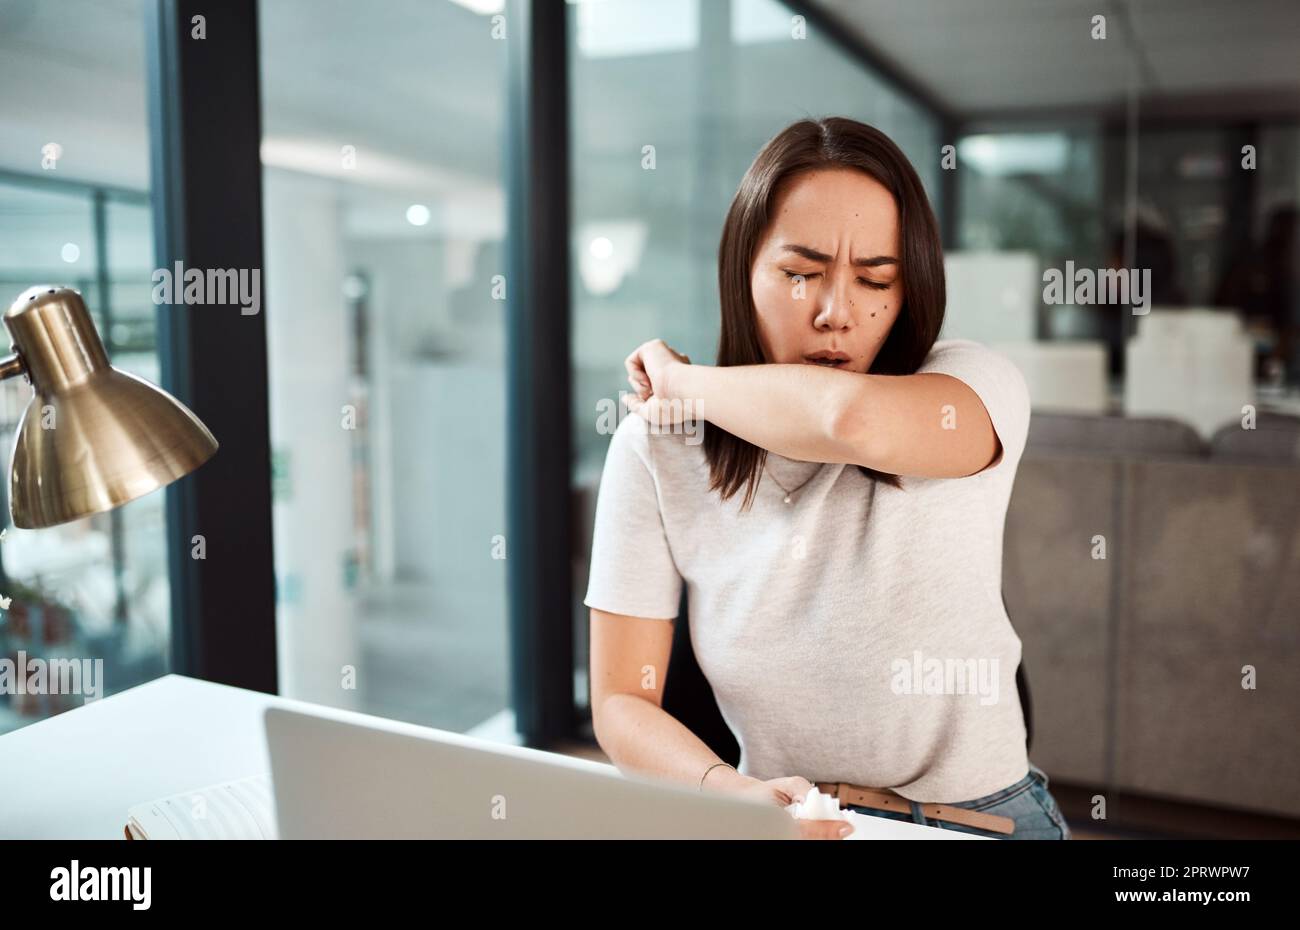 Practice good cough etiquette for the sake of everyones health. a young businesswoman coughing into her elbow in an office. Stock Photo